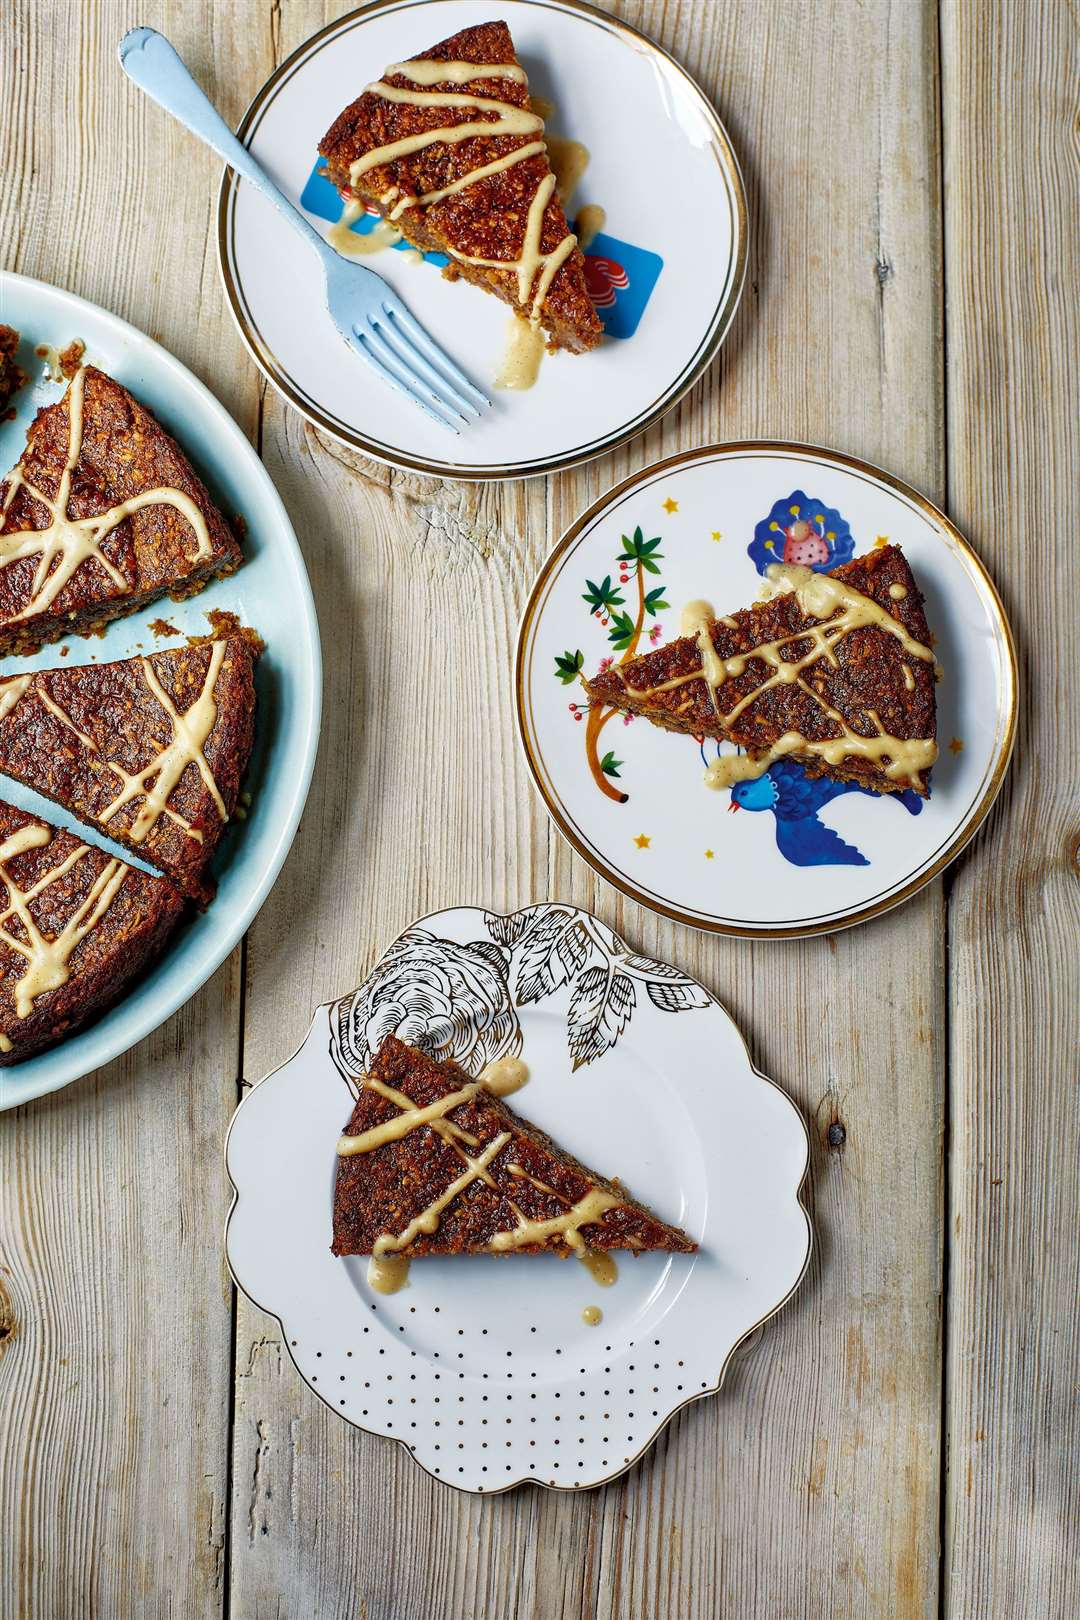 Date and almond cake with caramel sauce from Happy Vegan by Fearne Cotton. Picture: PA Photo/Andrew Burton